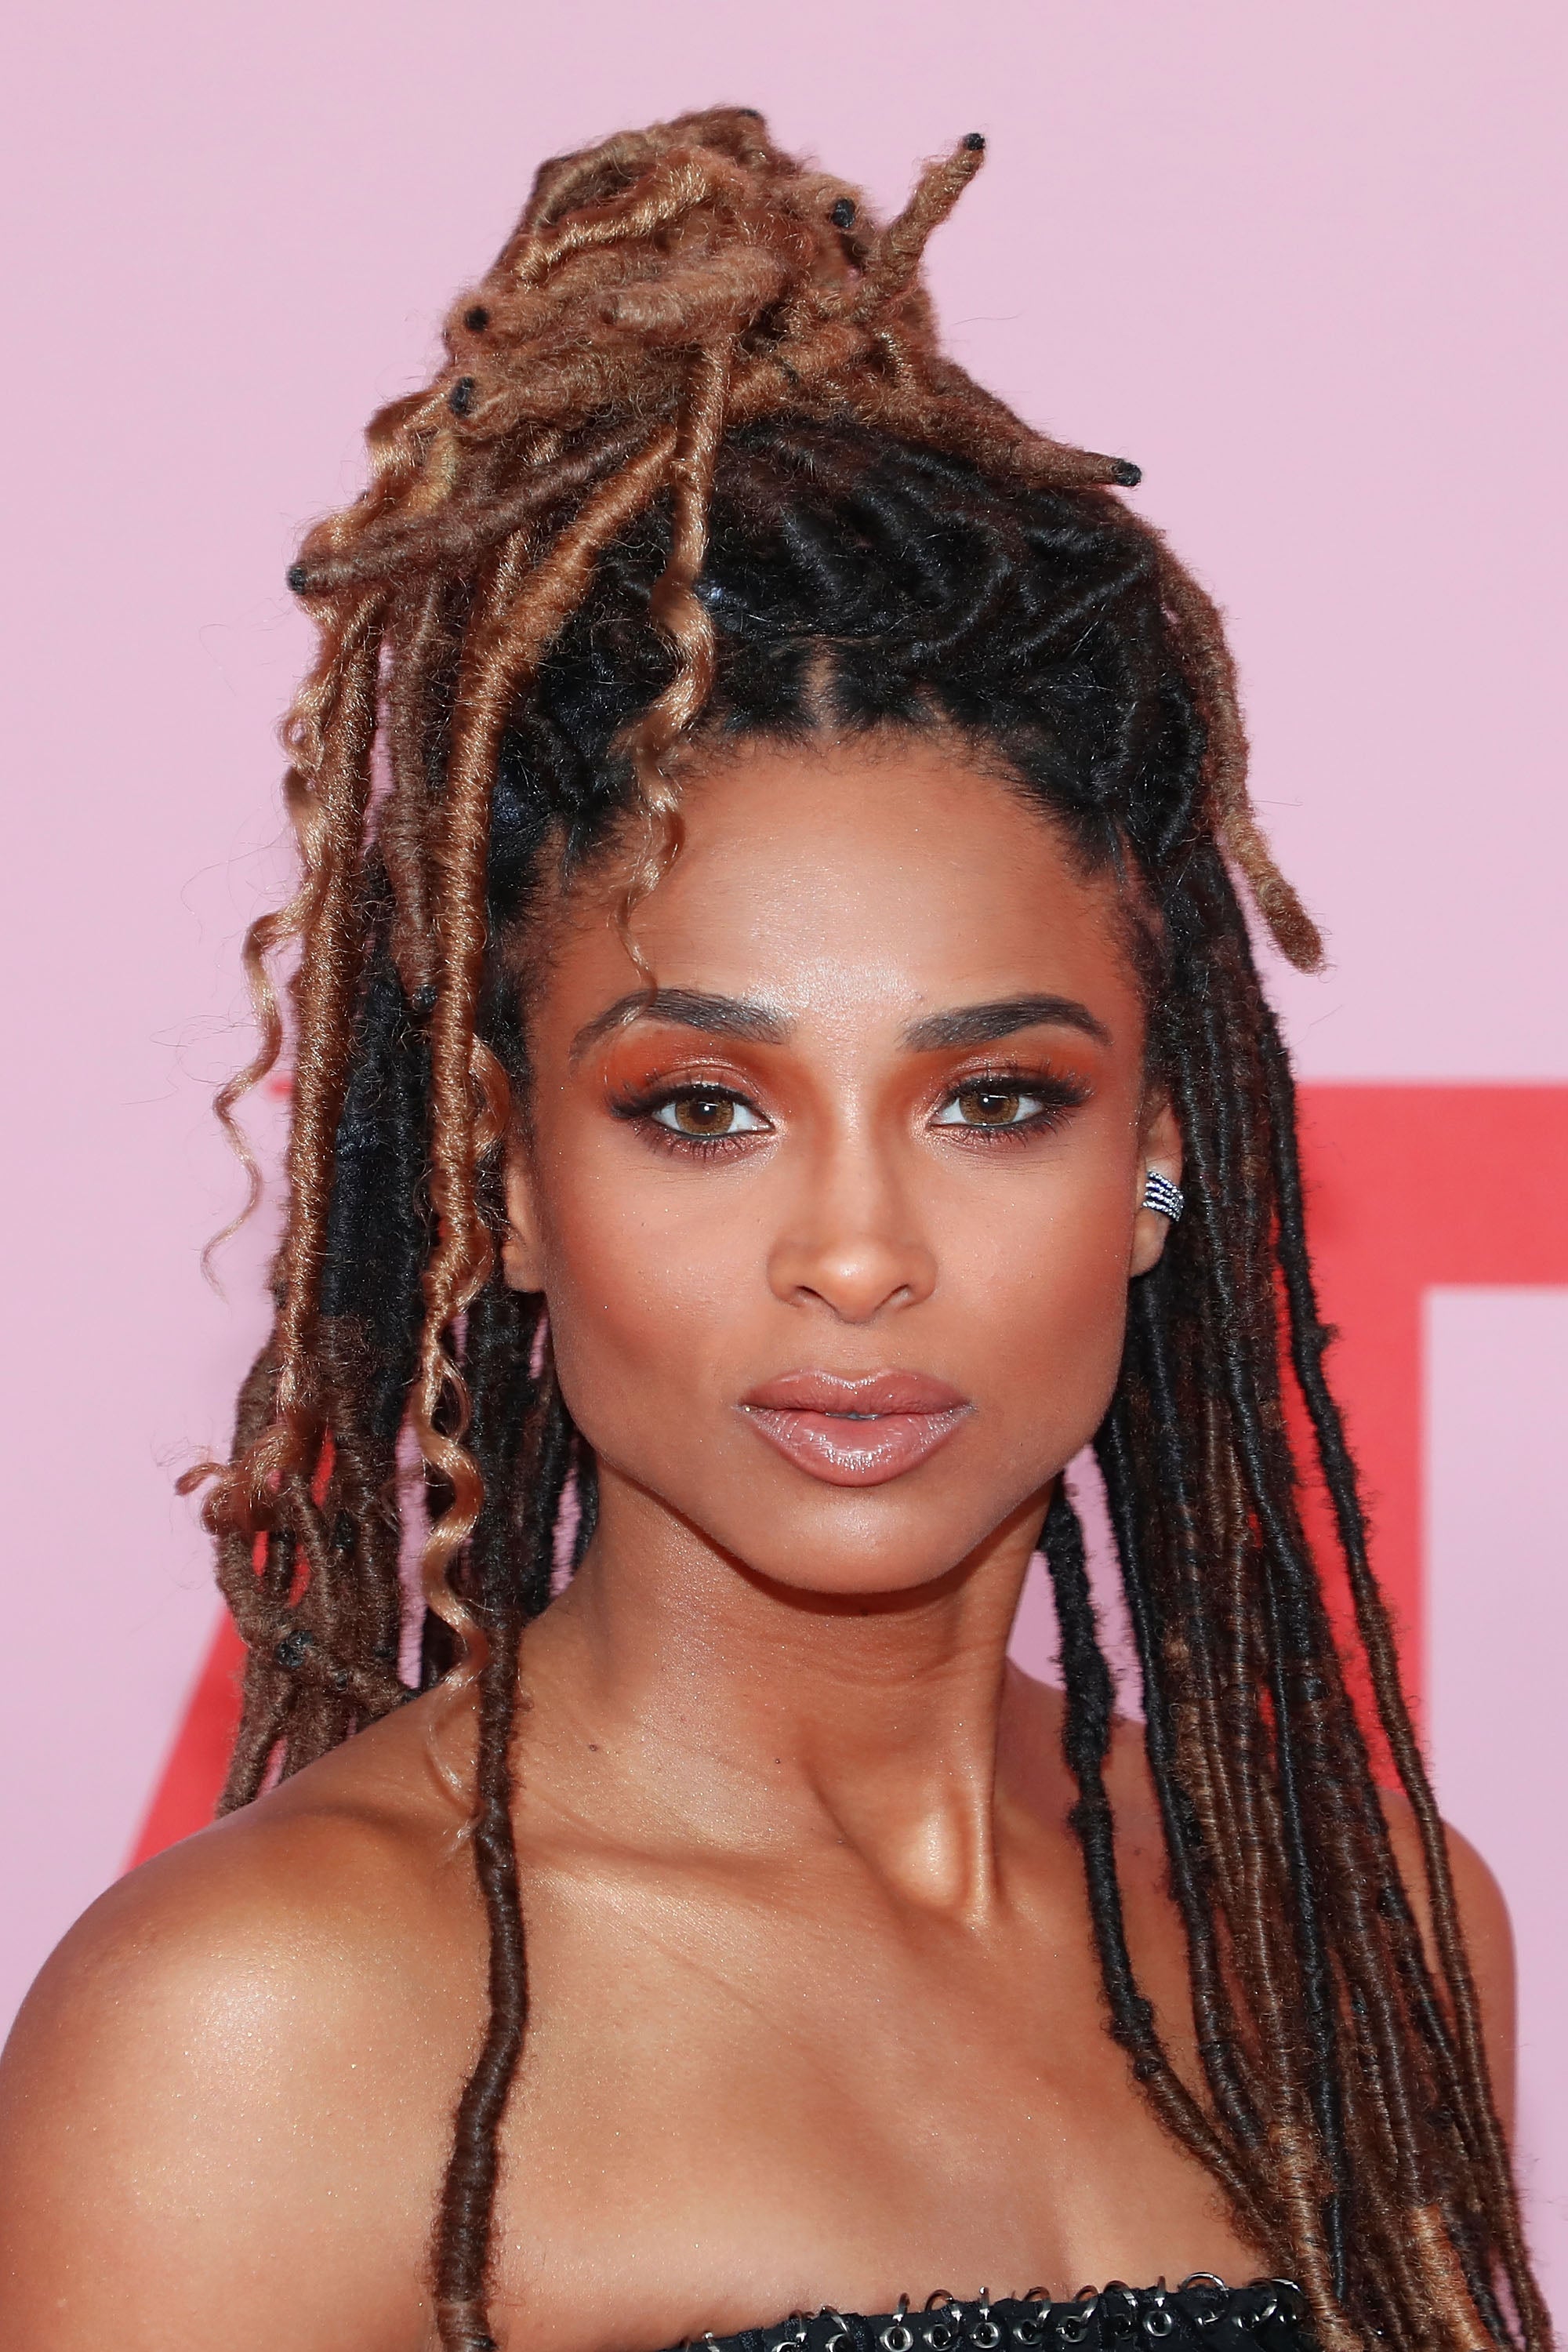 10 Celebrity Hair And Makeup Trends We're Bringing Into 2020